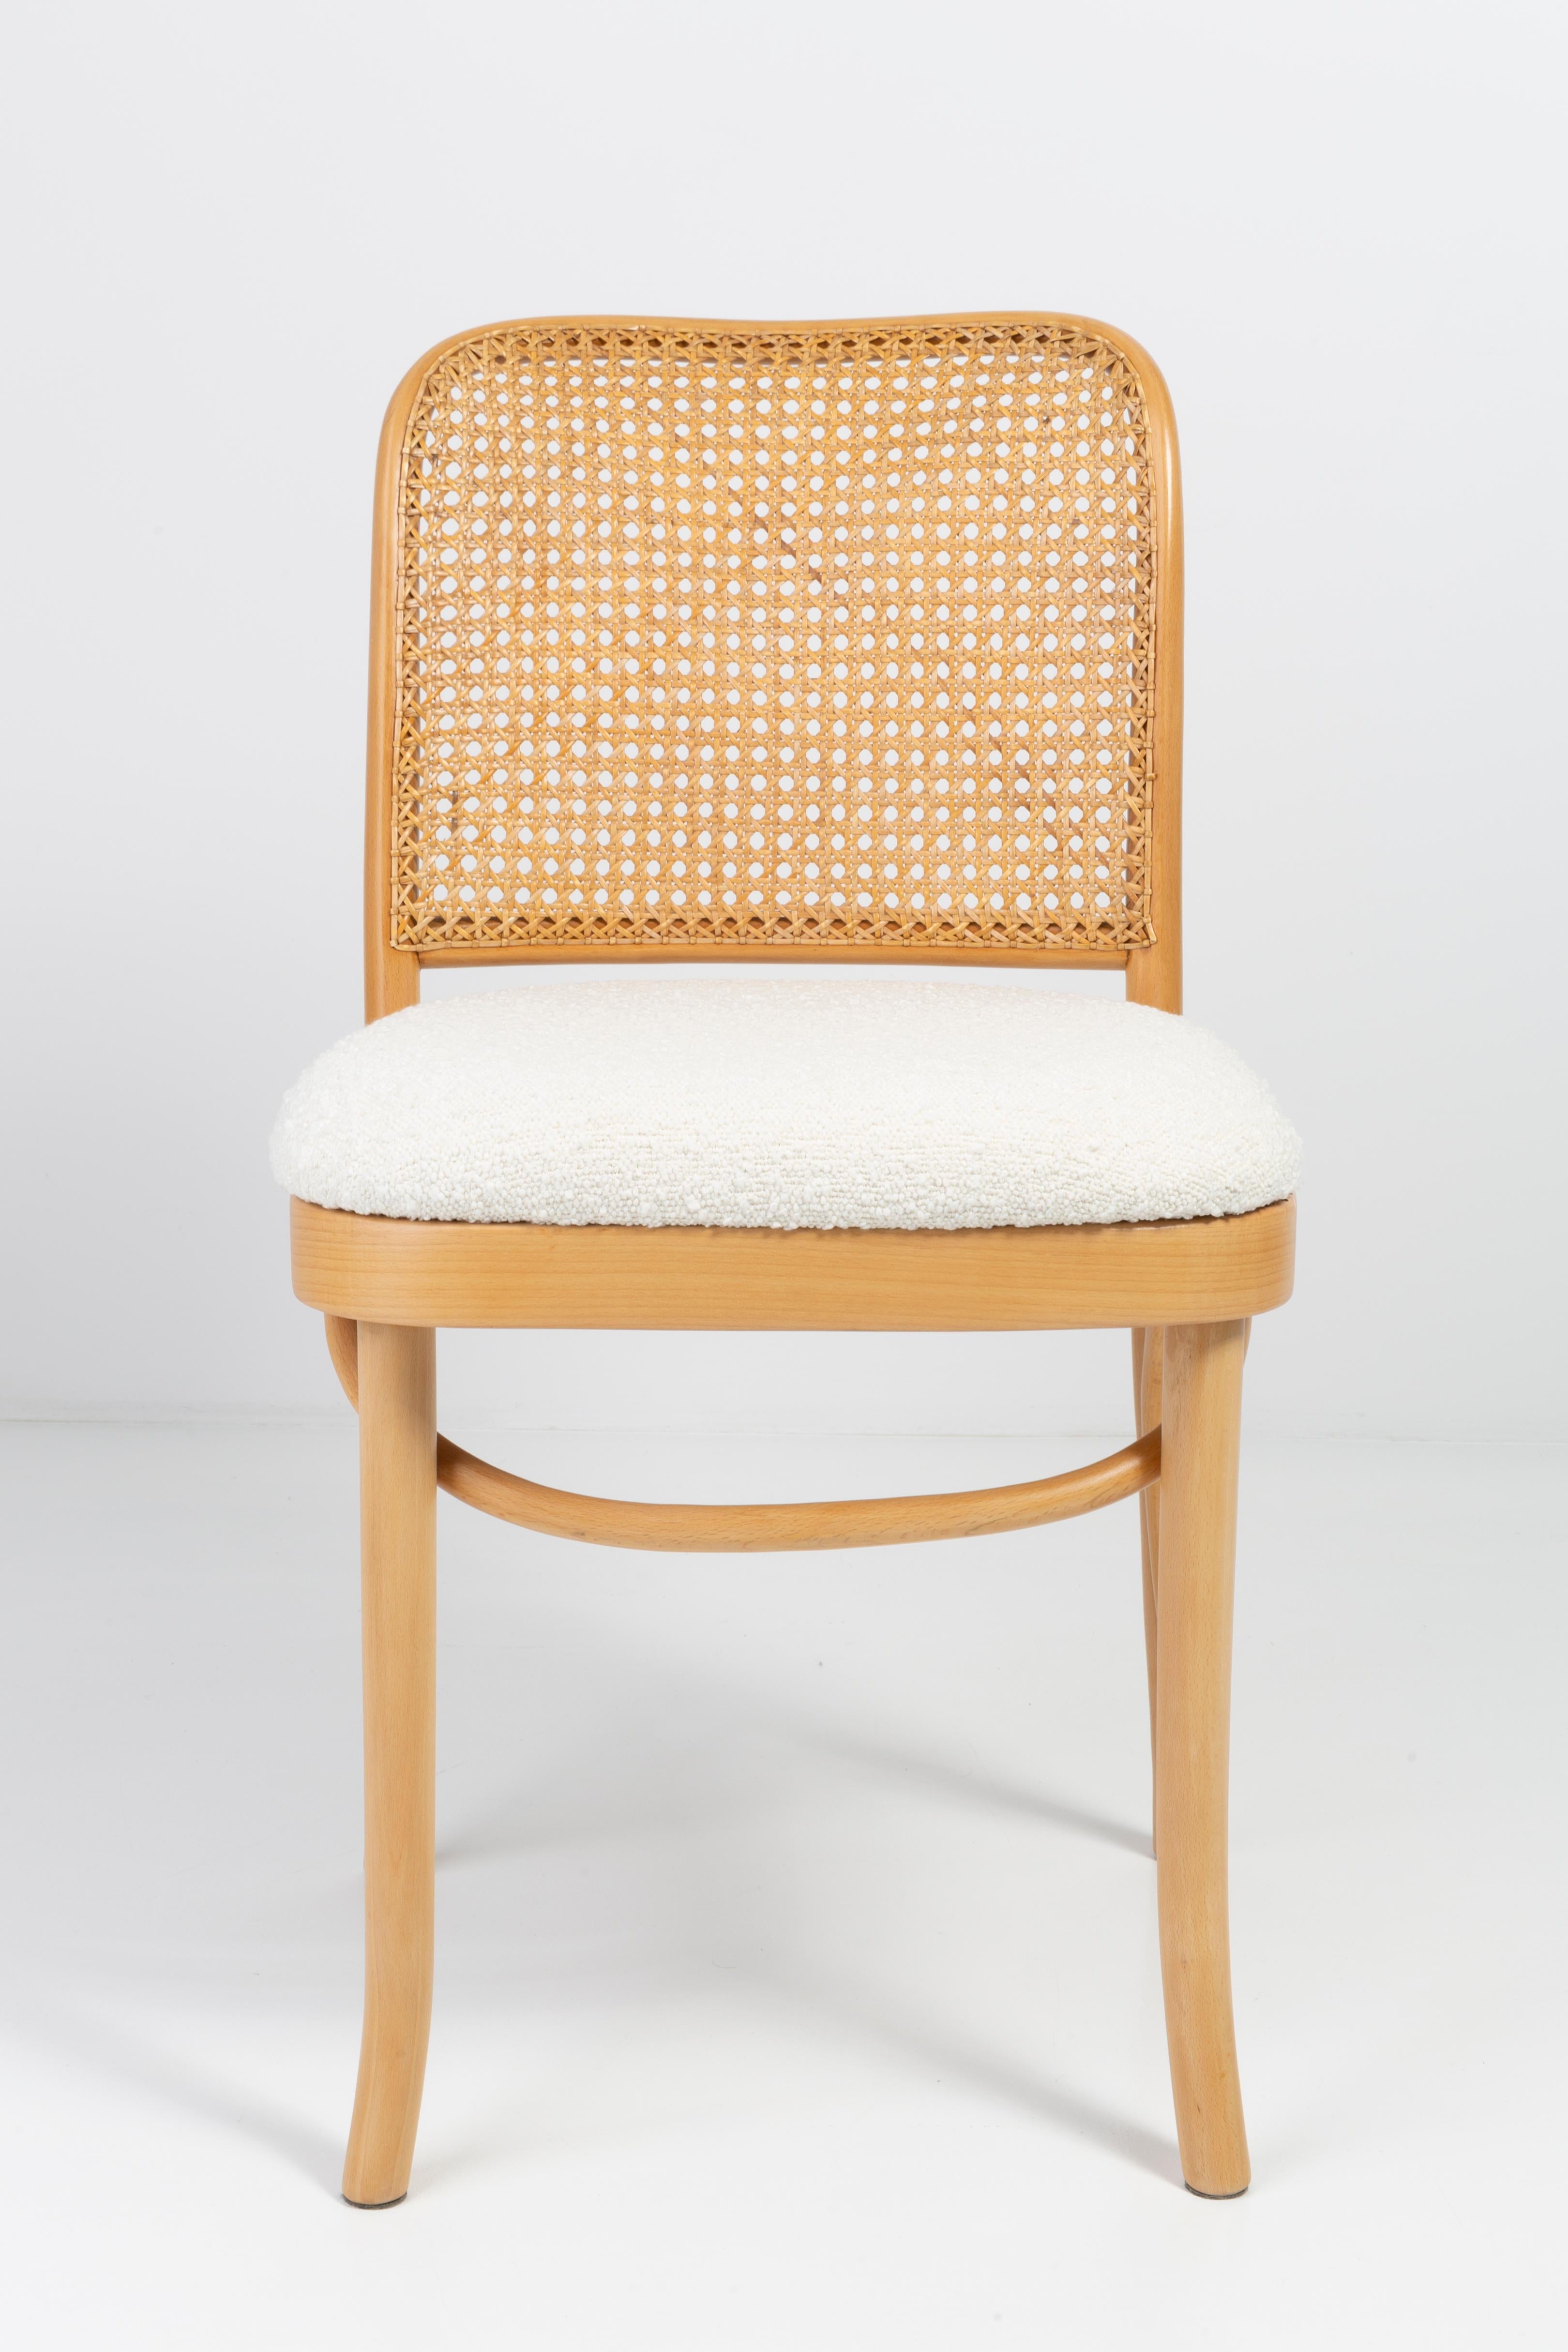 Hand-Crafted Light White Boucle Thonet Wood Rattan Chair, 1960s For Sale